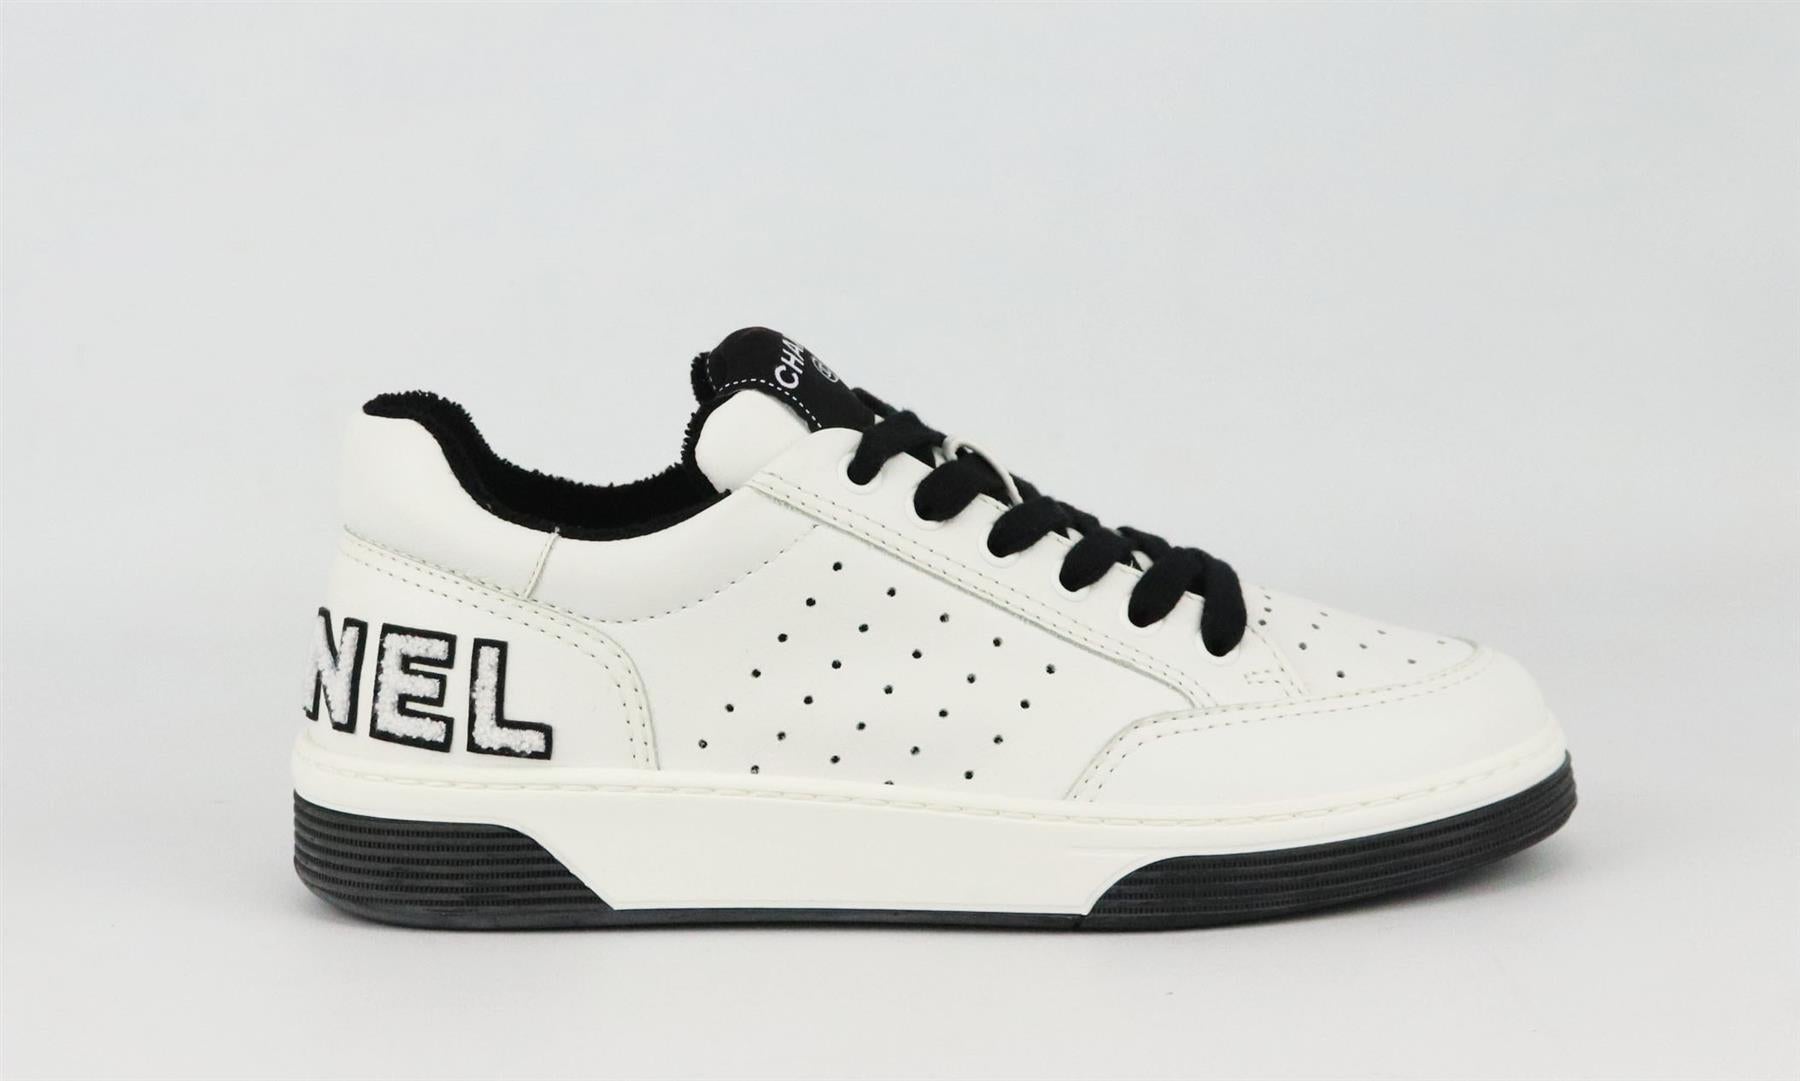 Part of Chanel's 2021 Collection, these low-top sneakers have been made from durable calfskin leather, they have the brand's logo on the back in leather and terry cloth and finished with thick black laces and terry-cloth interior to make it easy to